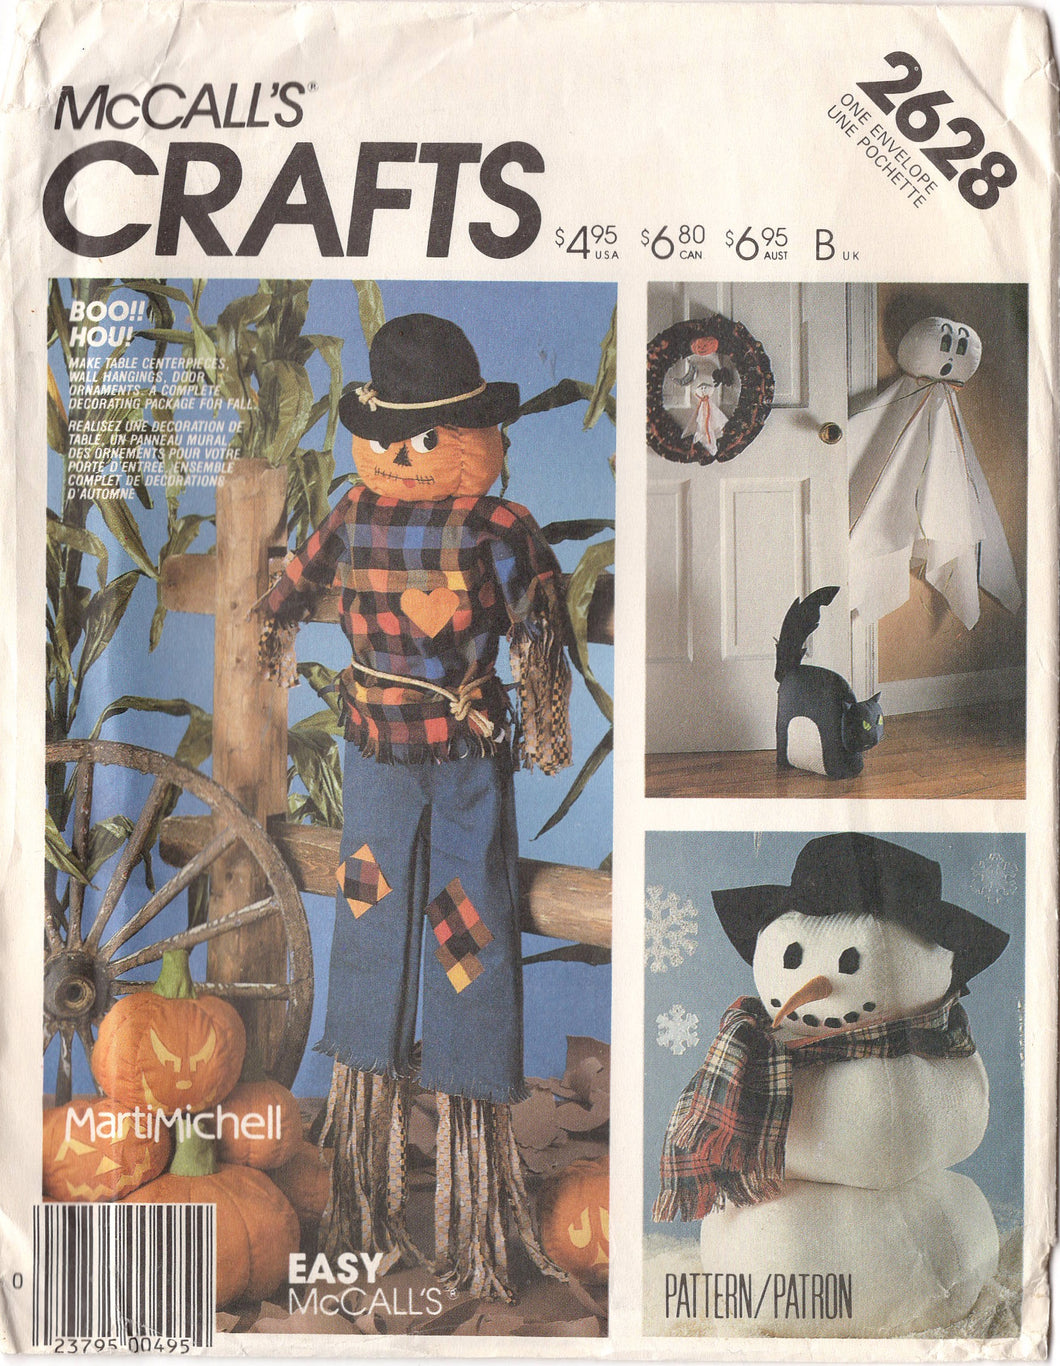 1980's McCall's Crafts Stuffed Scarecrow, Sitting Ghost, Snowman, Haunted House, Pumpkins, Wreath - No. 2628